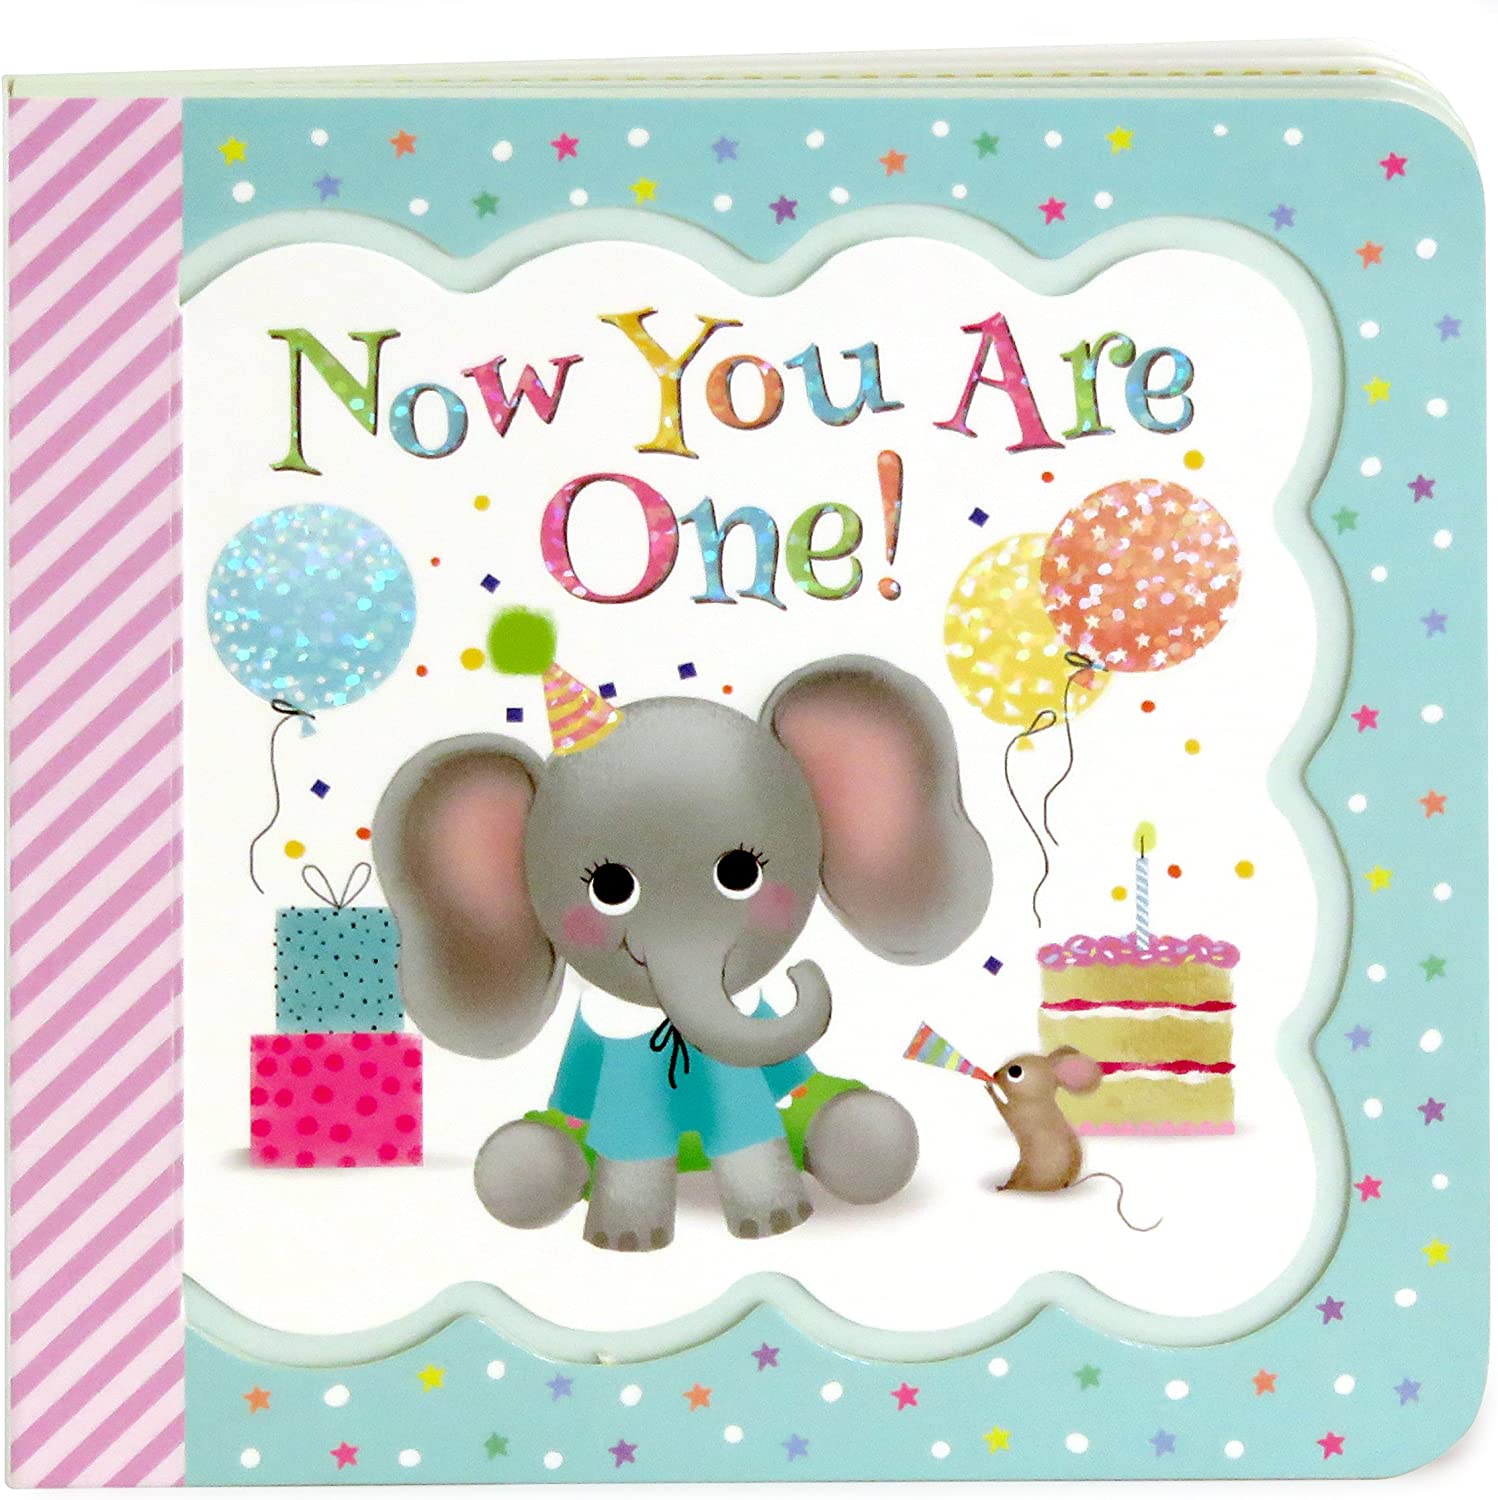 Now You Are One: Little Bird Greetings, Greeting Card Board Book with Personalization Flap, 1st Birthday Gifts for One Year Olds